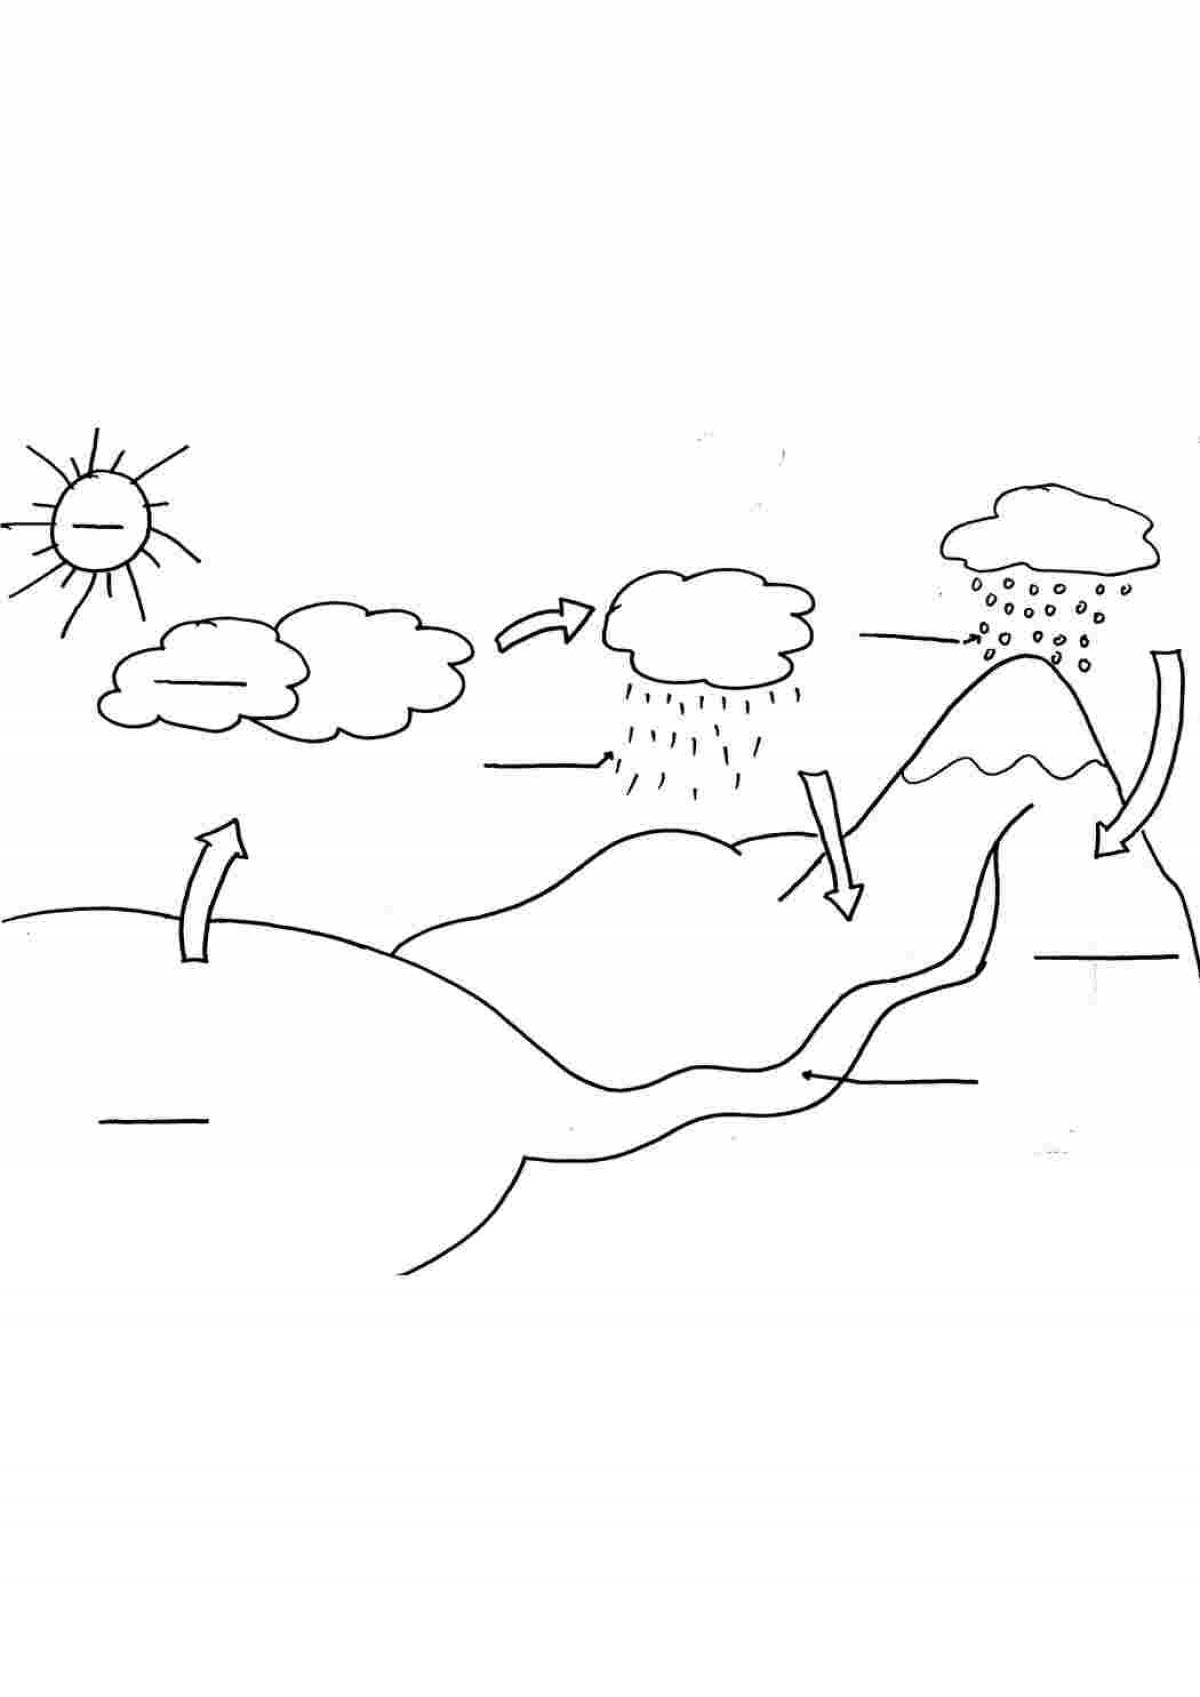 The water cycle for kids #9